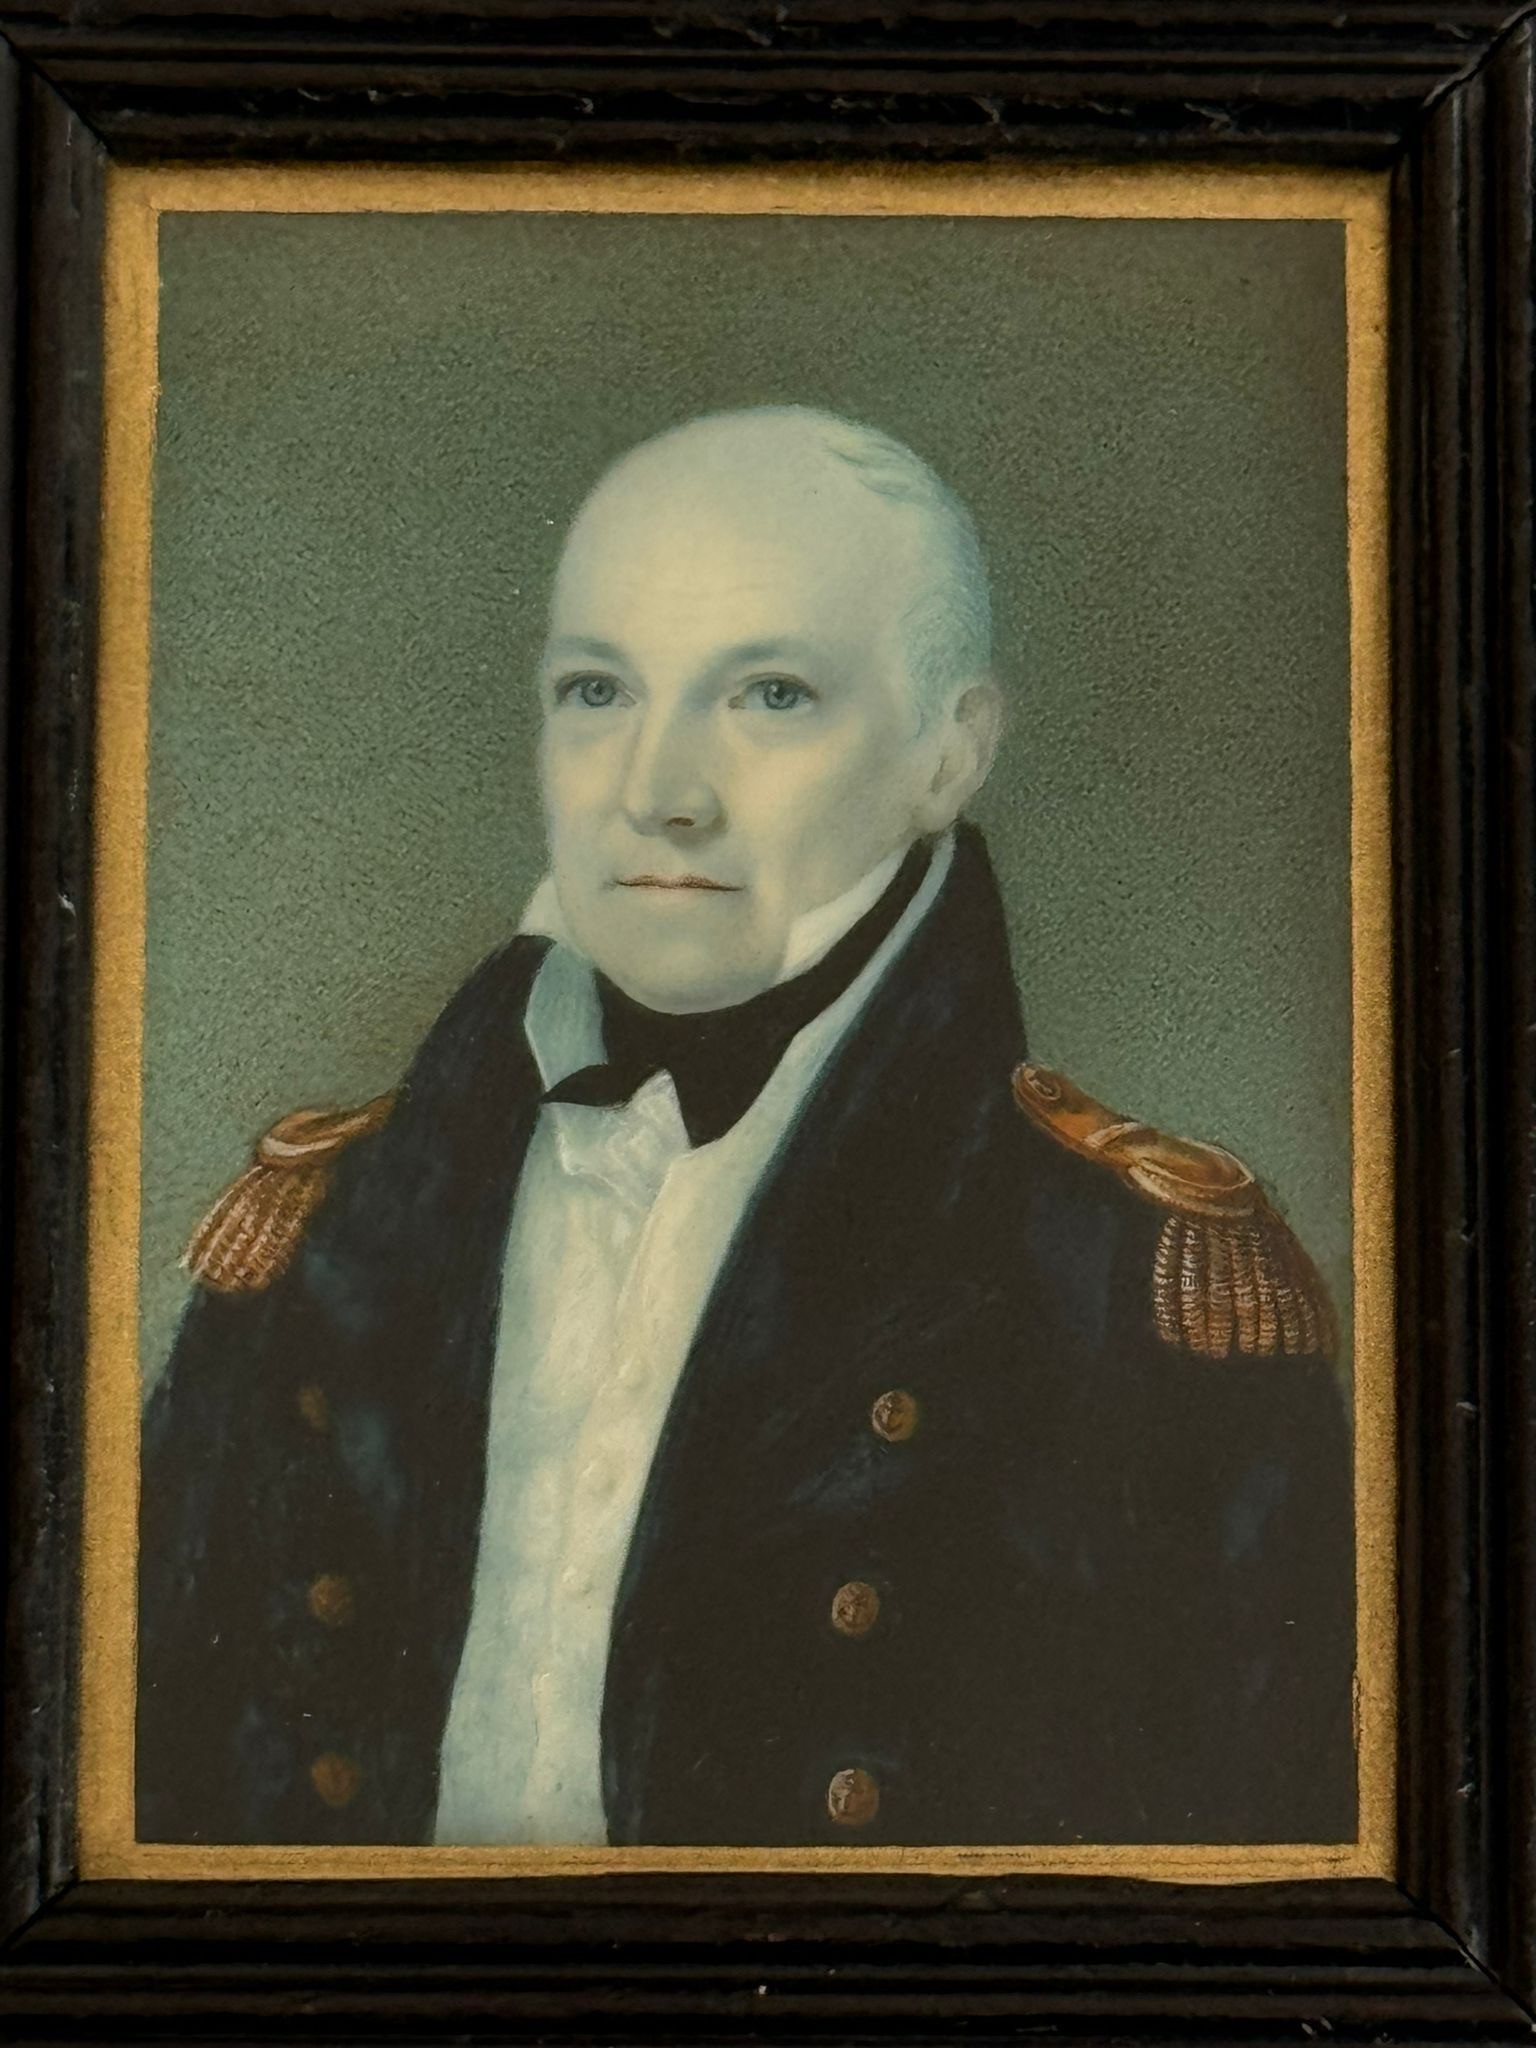 An early 19th century rectangular portrait miniature of a middle-aged senior Naval officer, with